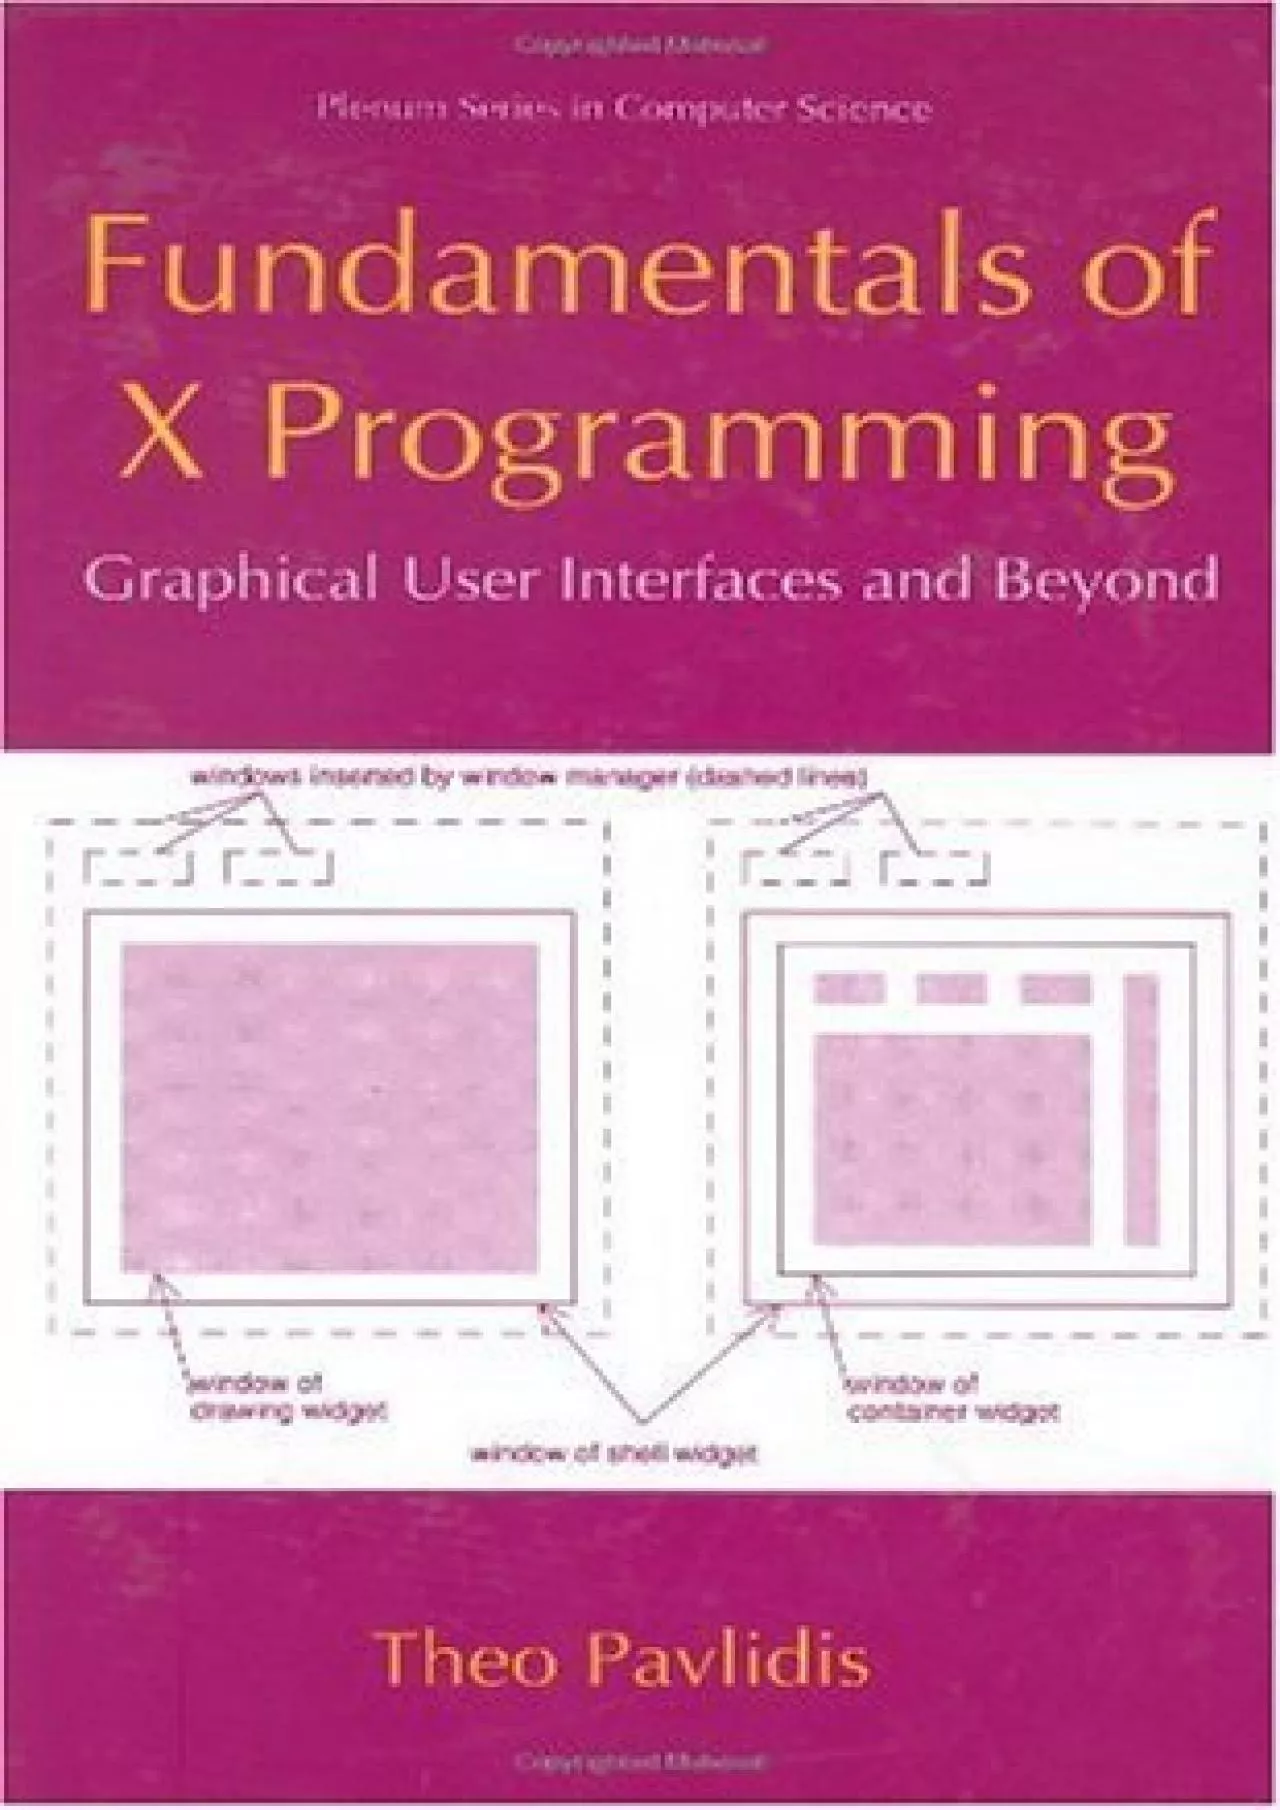 [DOWLOAD]-Fundamentals of X Programming: Graphical User Interfaces and Beyond (Series